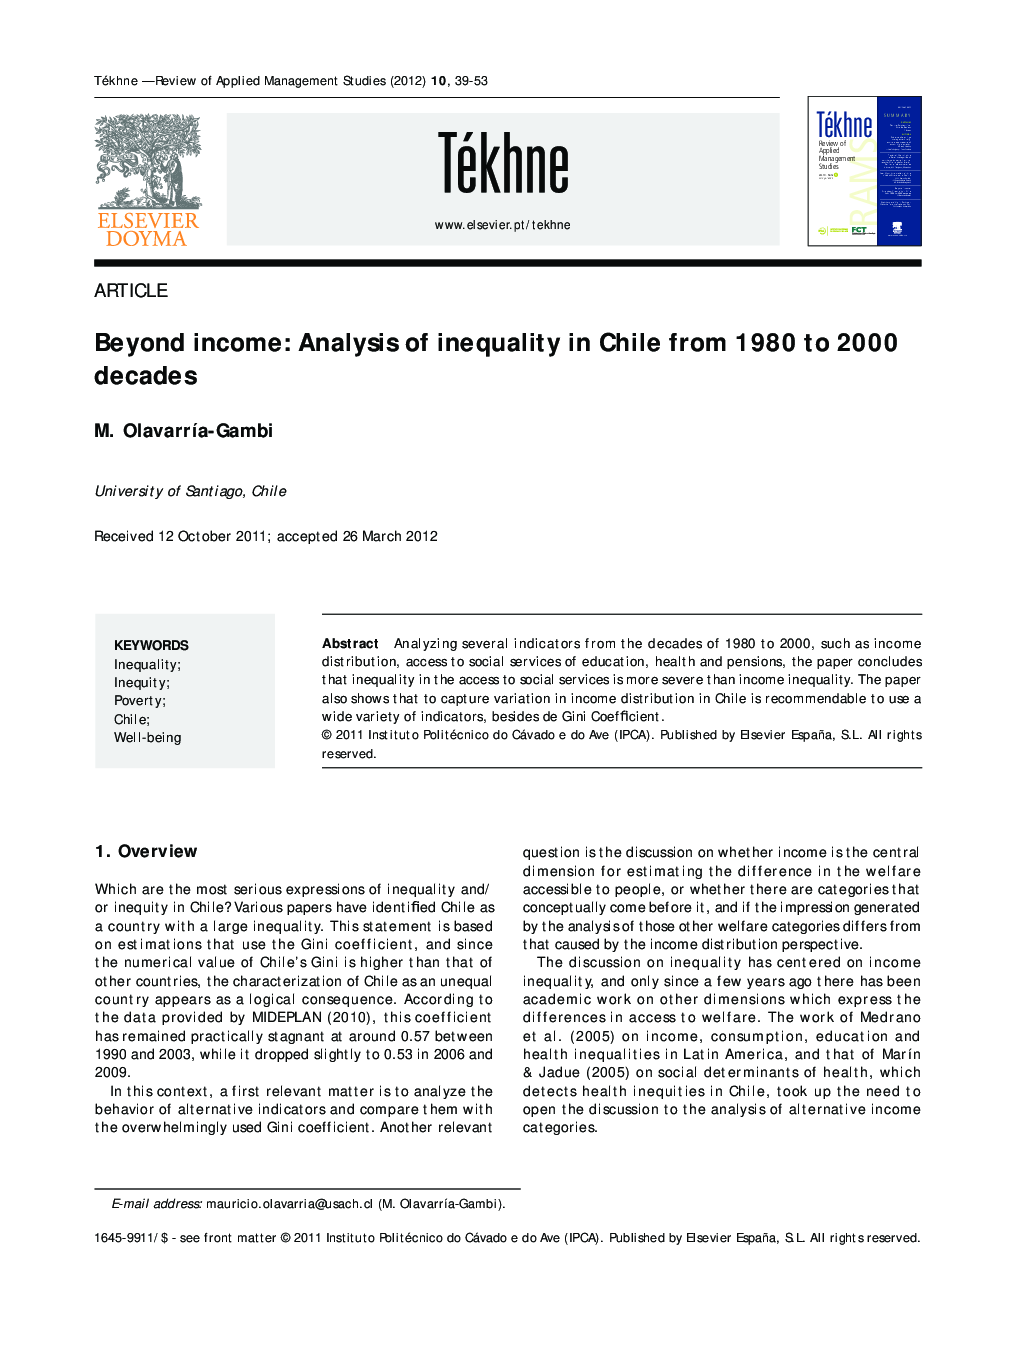 Beyond income: Analysis of inequality in Chile from 1980 to 2000 decades